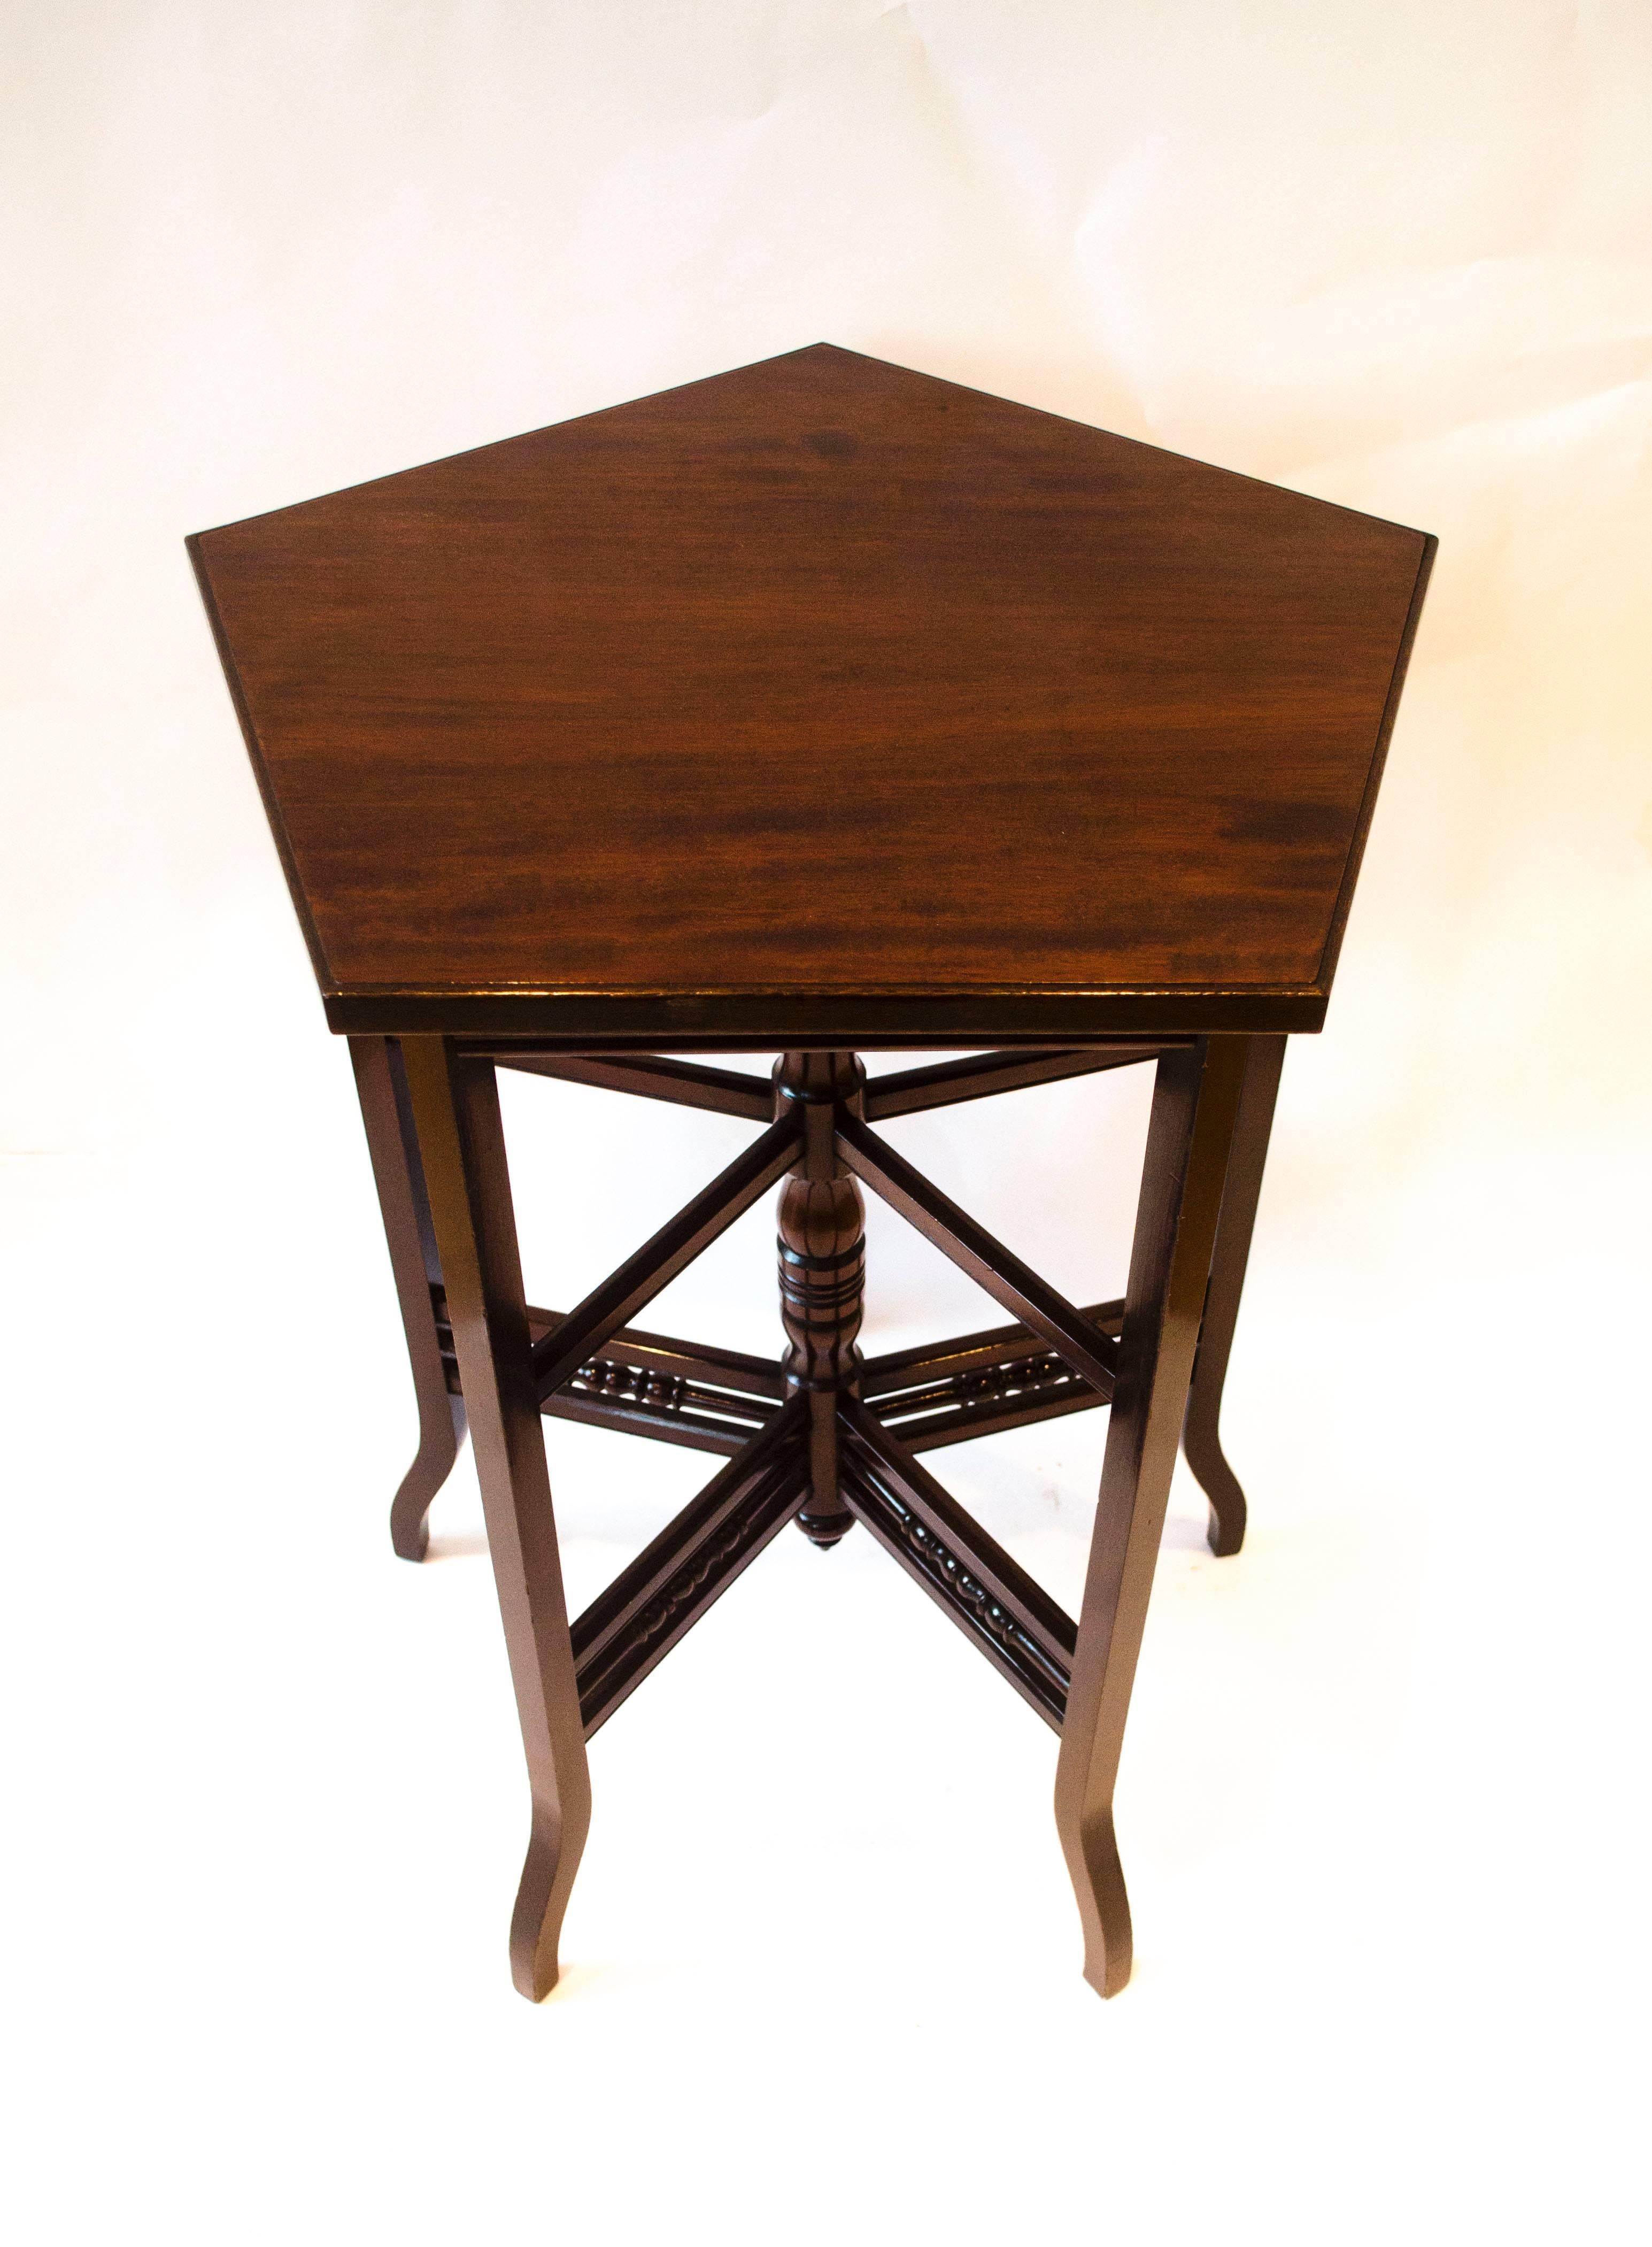 E W Godwin. Attr. An Anglo-Japanese five leg walnut side table with four sets of radiating stretchers using square bar and a row of turned stretchers uniting a central turned up right post.
Godwin used this design in a number of centre and side